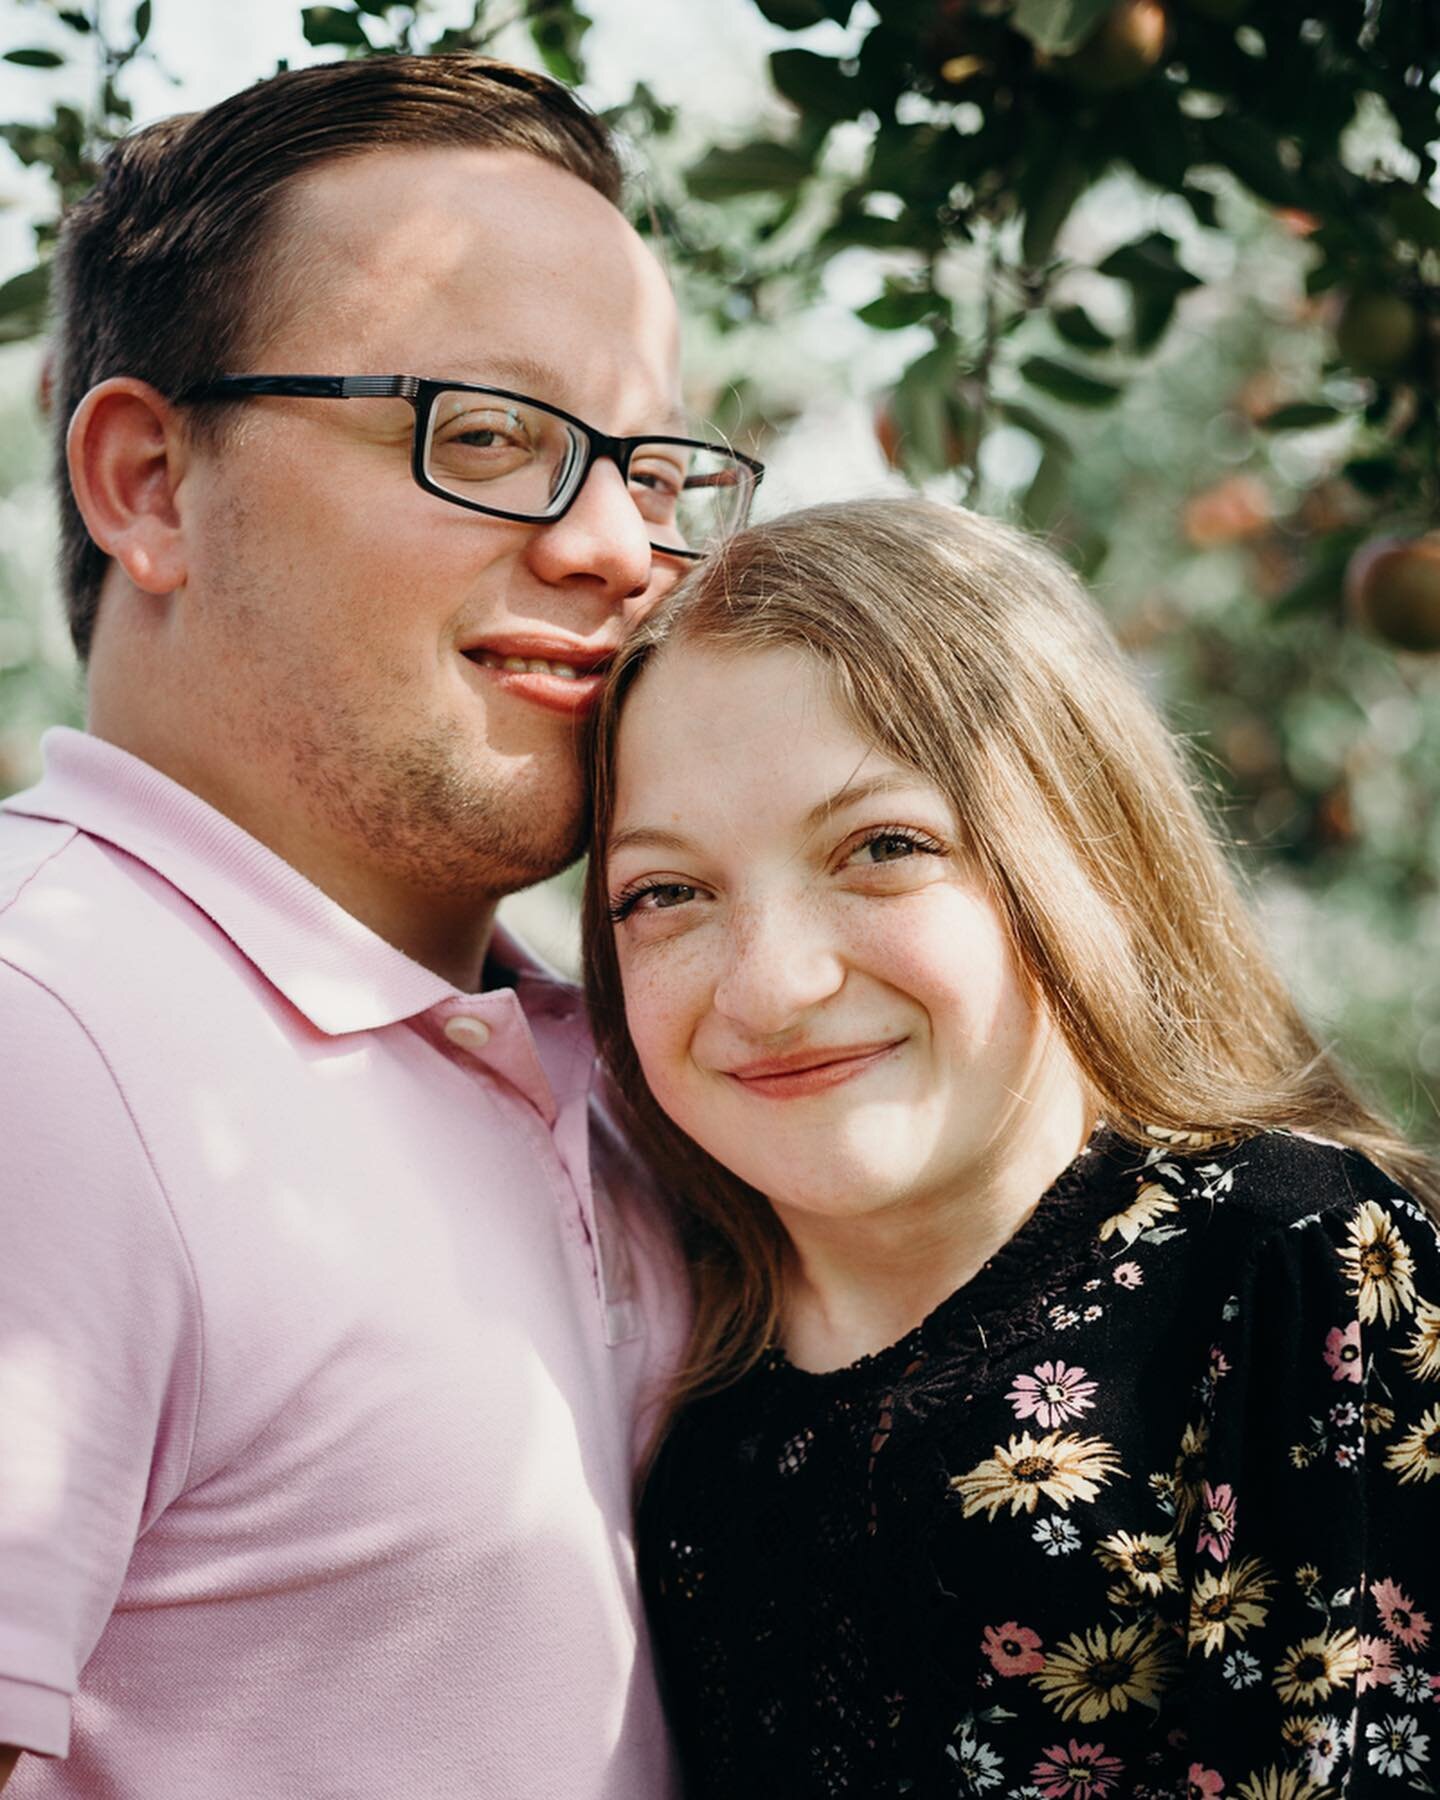 Marie &amp; Morgan at Blake&rsquo;s Cider Mill in September. 
.
I met Marie last year when she agreed to be in my portrait series Portraits of Persons with Disabilities (@p_p_w_d). She is the first person I&rsquo;ve ever met who shares my rare disabi